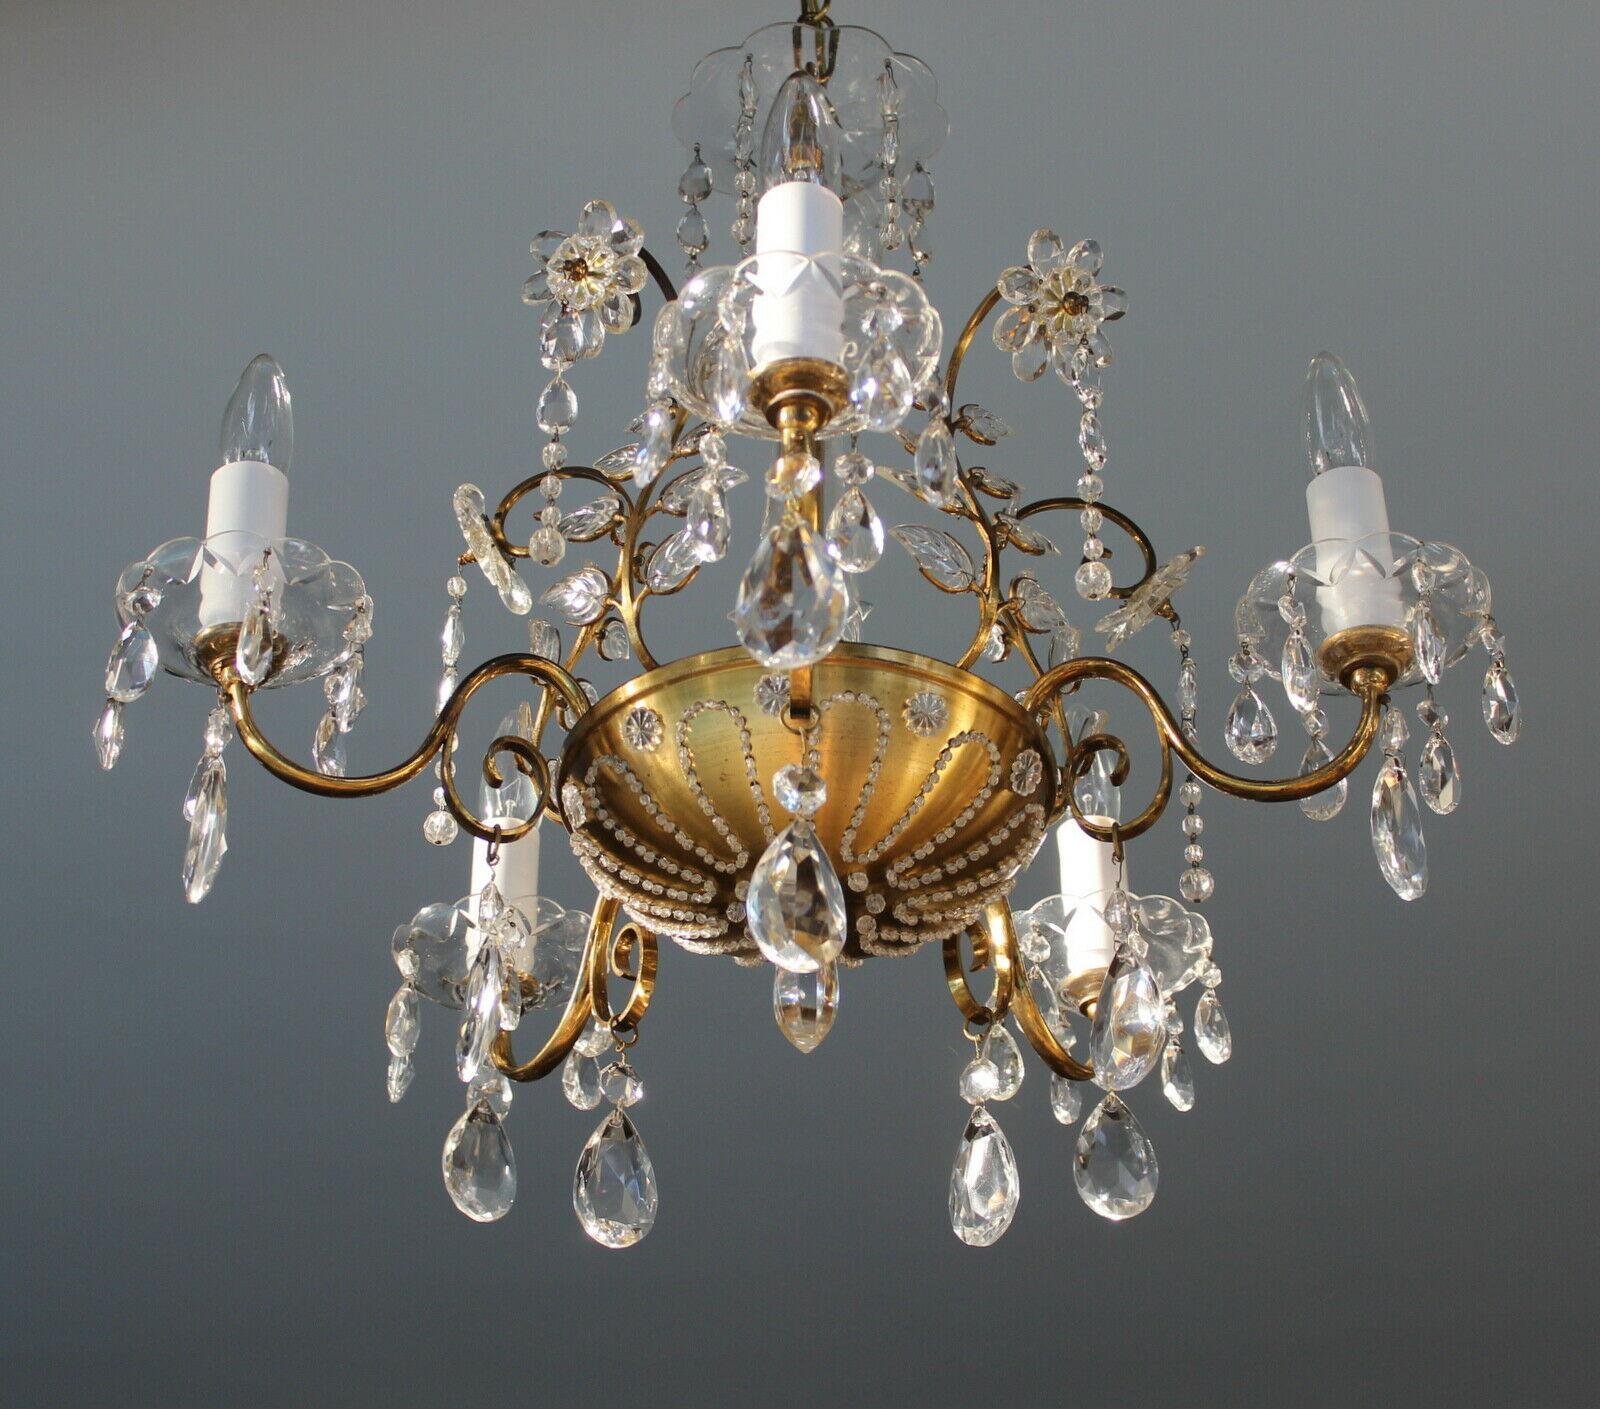 French Art Deco 1920's Bronze/ Brass & Cut Crystal Floral Chandelier. This chandelier is amazing. Please note the impeccable detail. From Maison Bagues Paris. Purchased in France while on a buying trip.